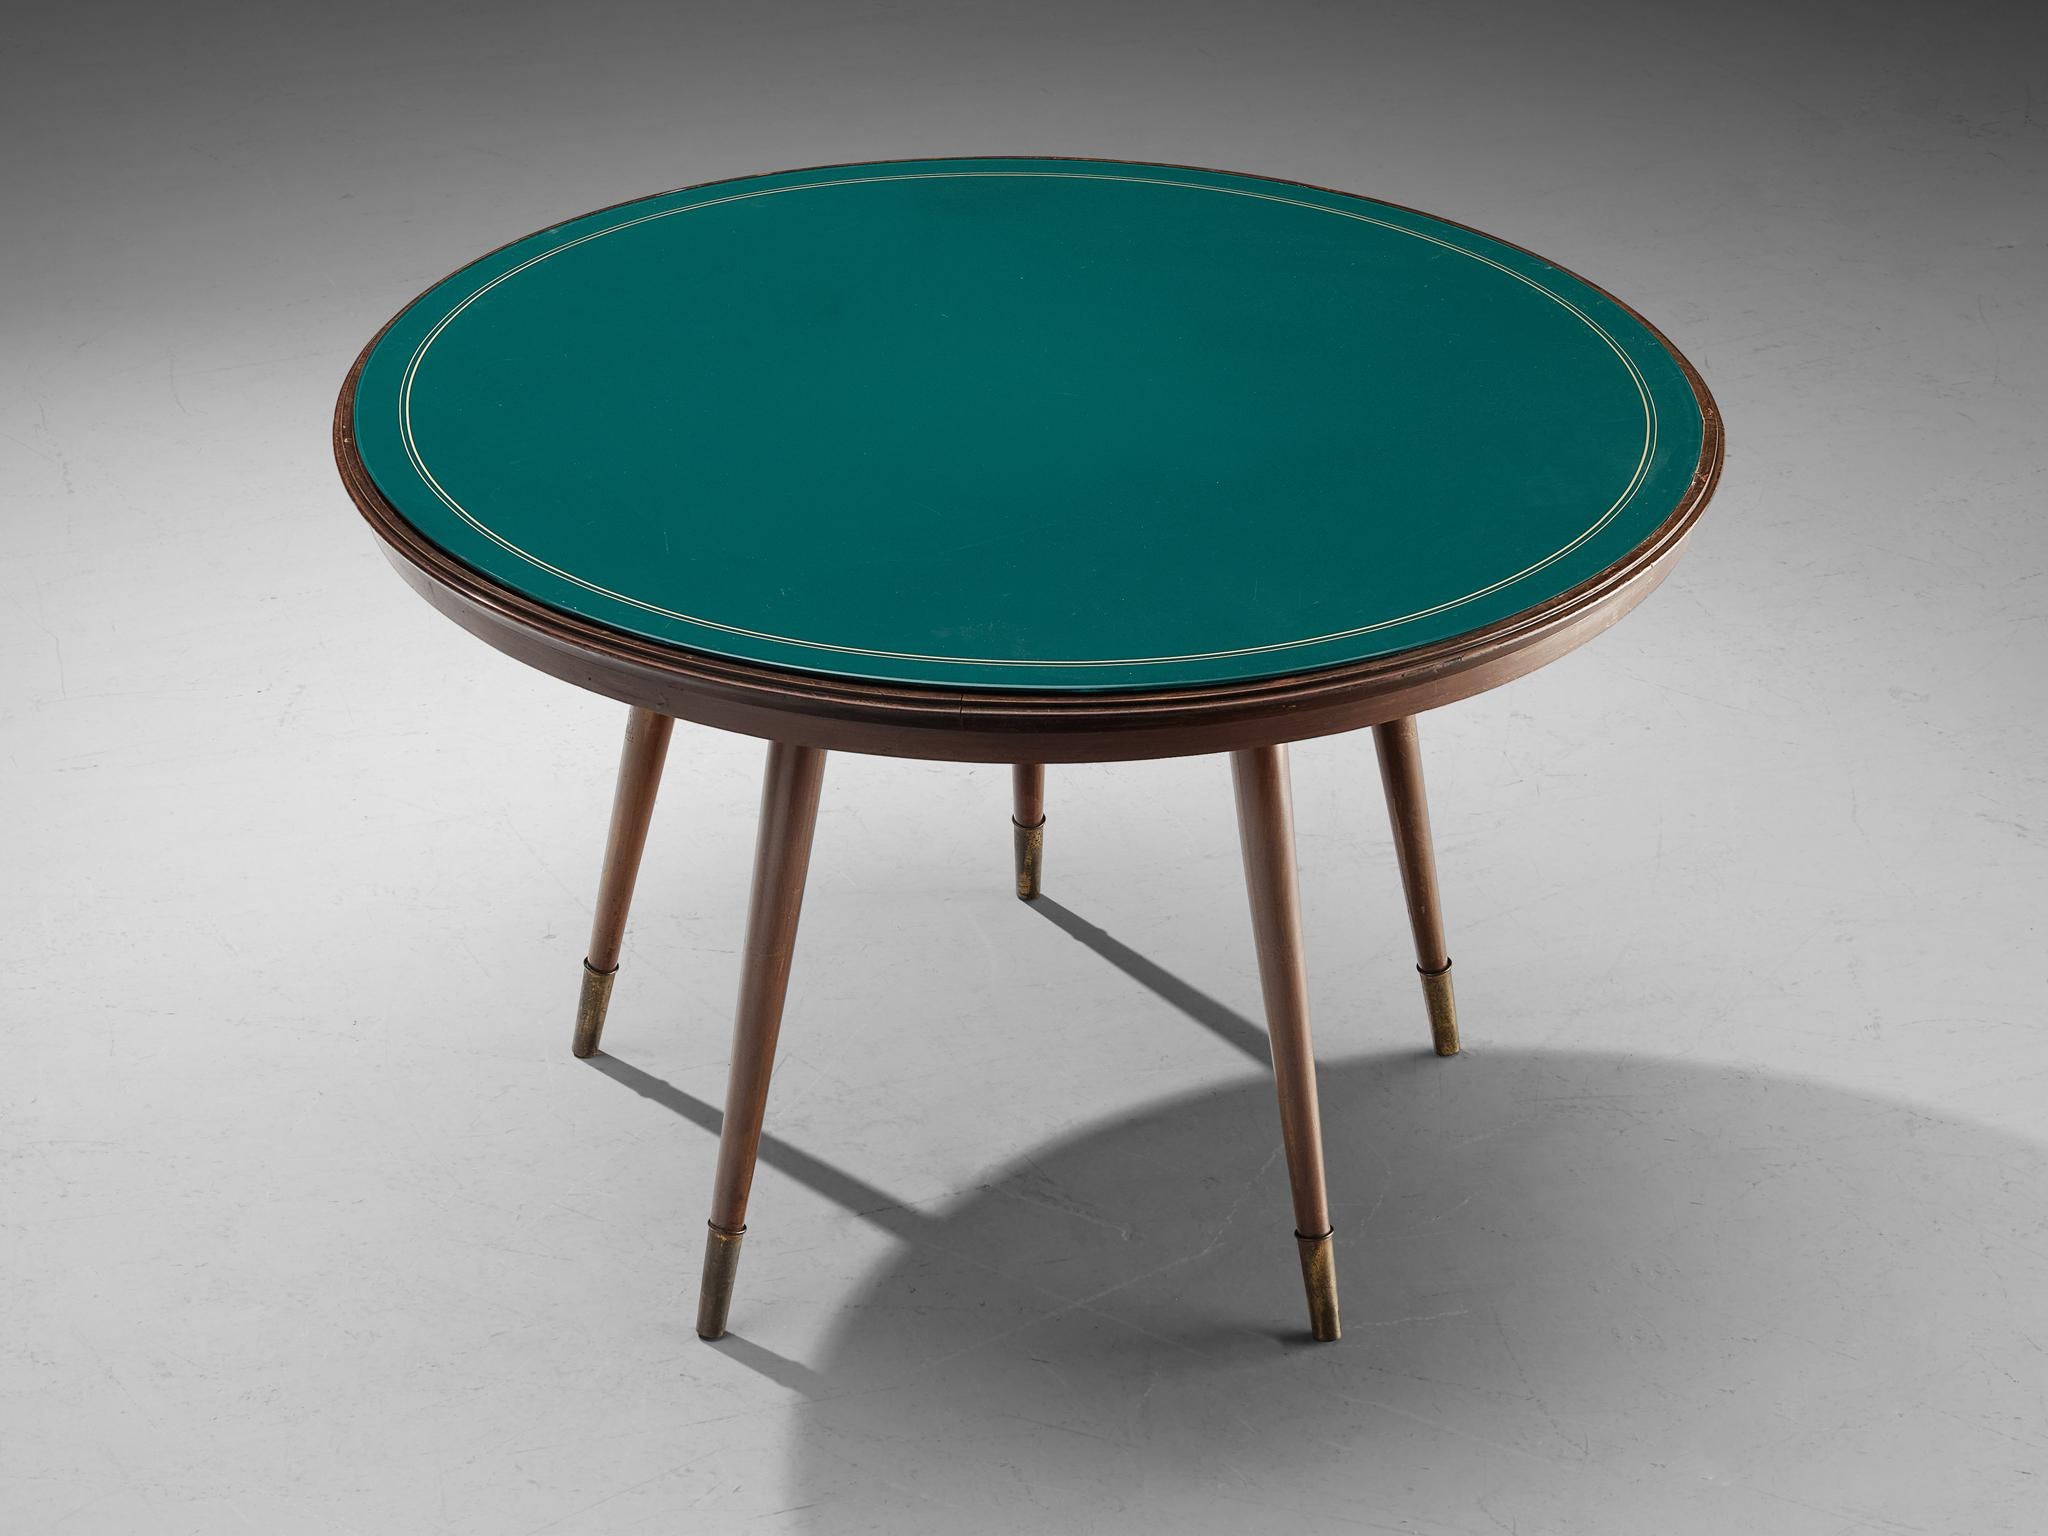 Round centre or dining table, wood, glass, Italy, 1950s

Elegant round dining or center table made in Italy in the 1950s. The table top is executed in green glass with circular white detailing around it. The top is resting on five legs with brass